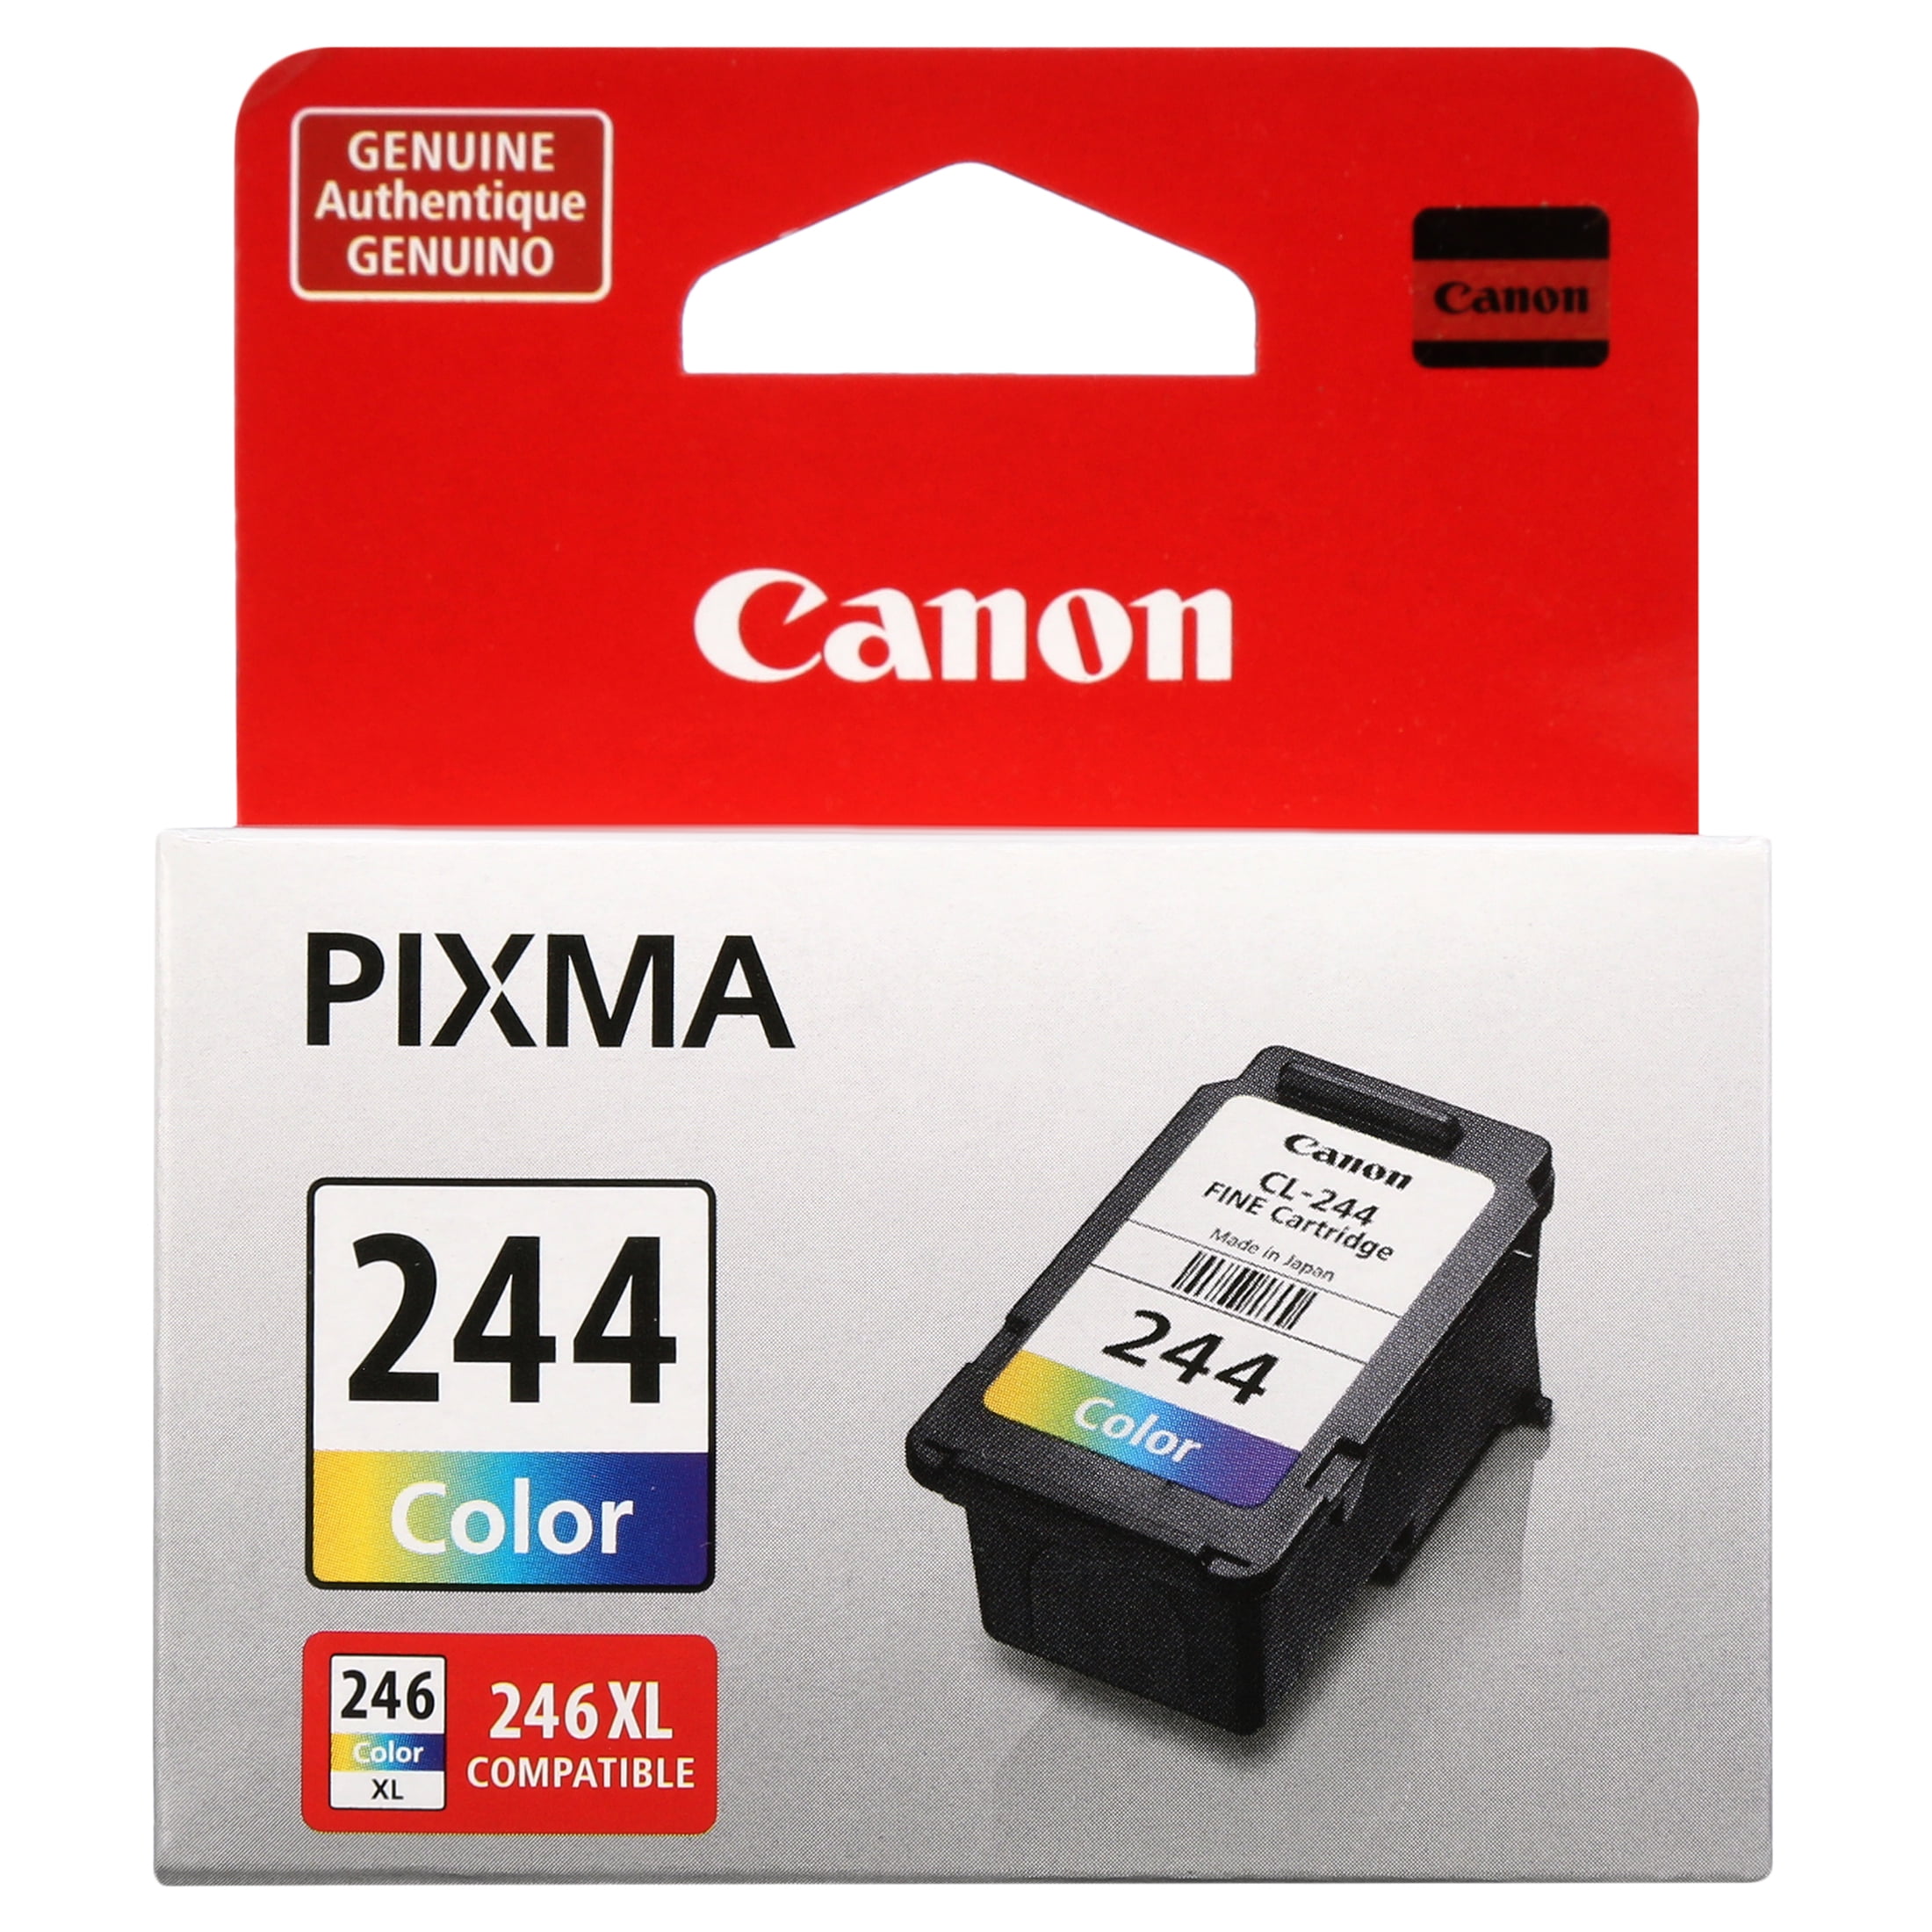 rigtig meget Hilsen Plantation Canon CL-244 Color Ink Cartridge, Compatible to iP2820, MG2420, MG2924,  MG492, MG3020, MG2525, TS3120, TS202, TR4520 and TR4522 - Walmart.com